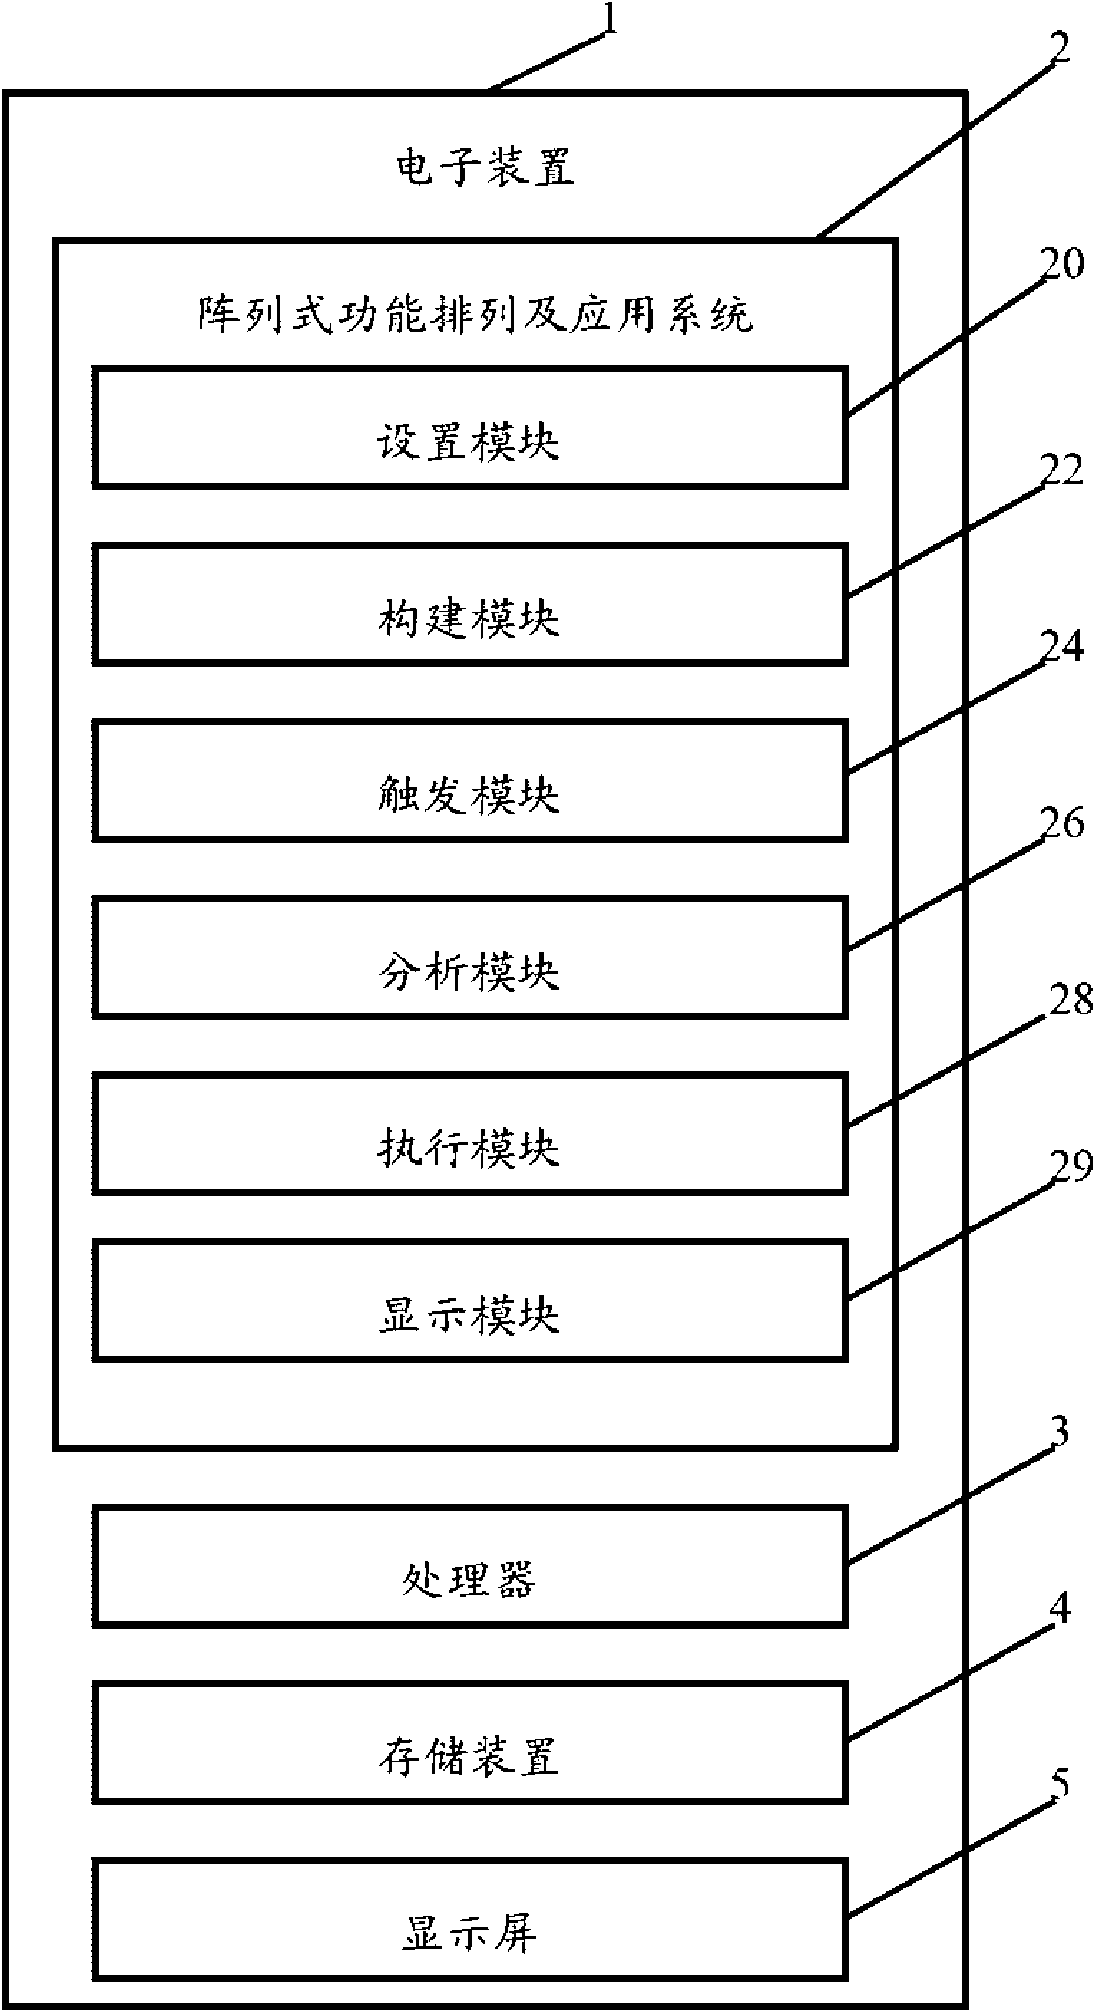 Array functional arrangements, application system and method